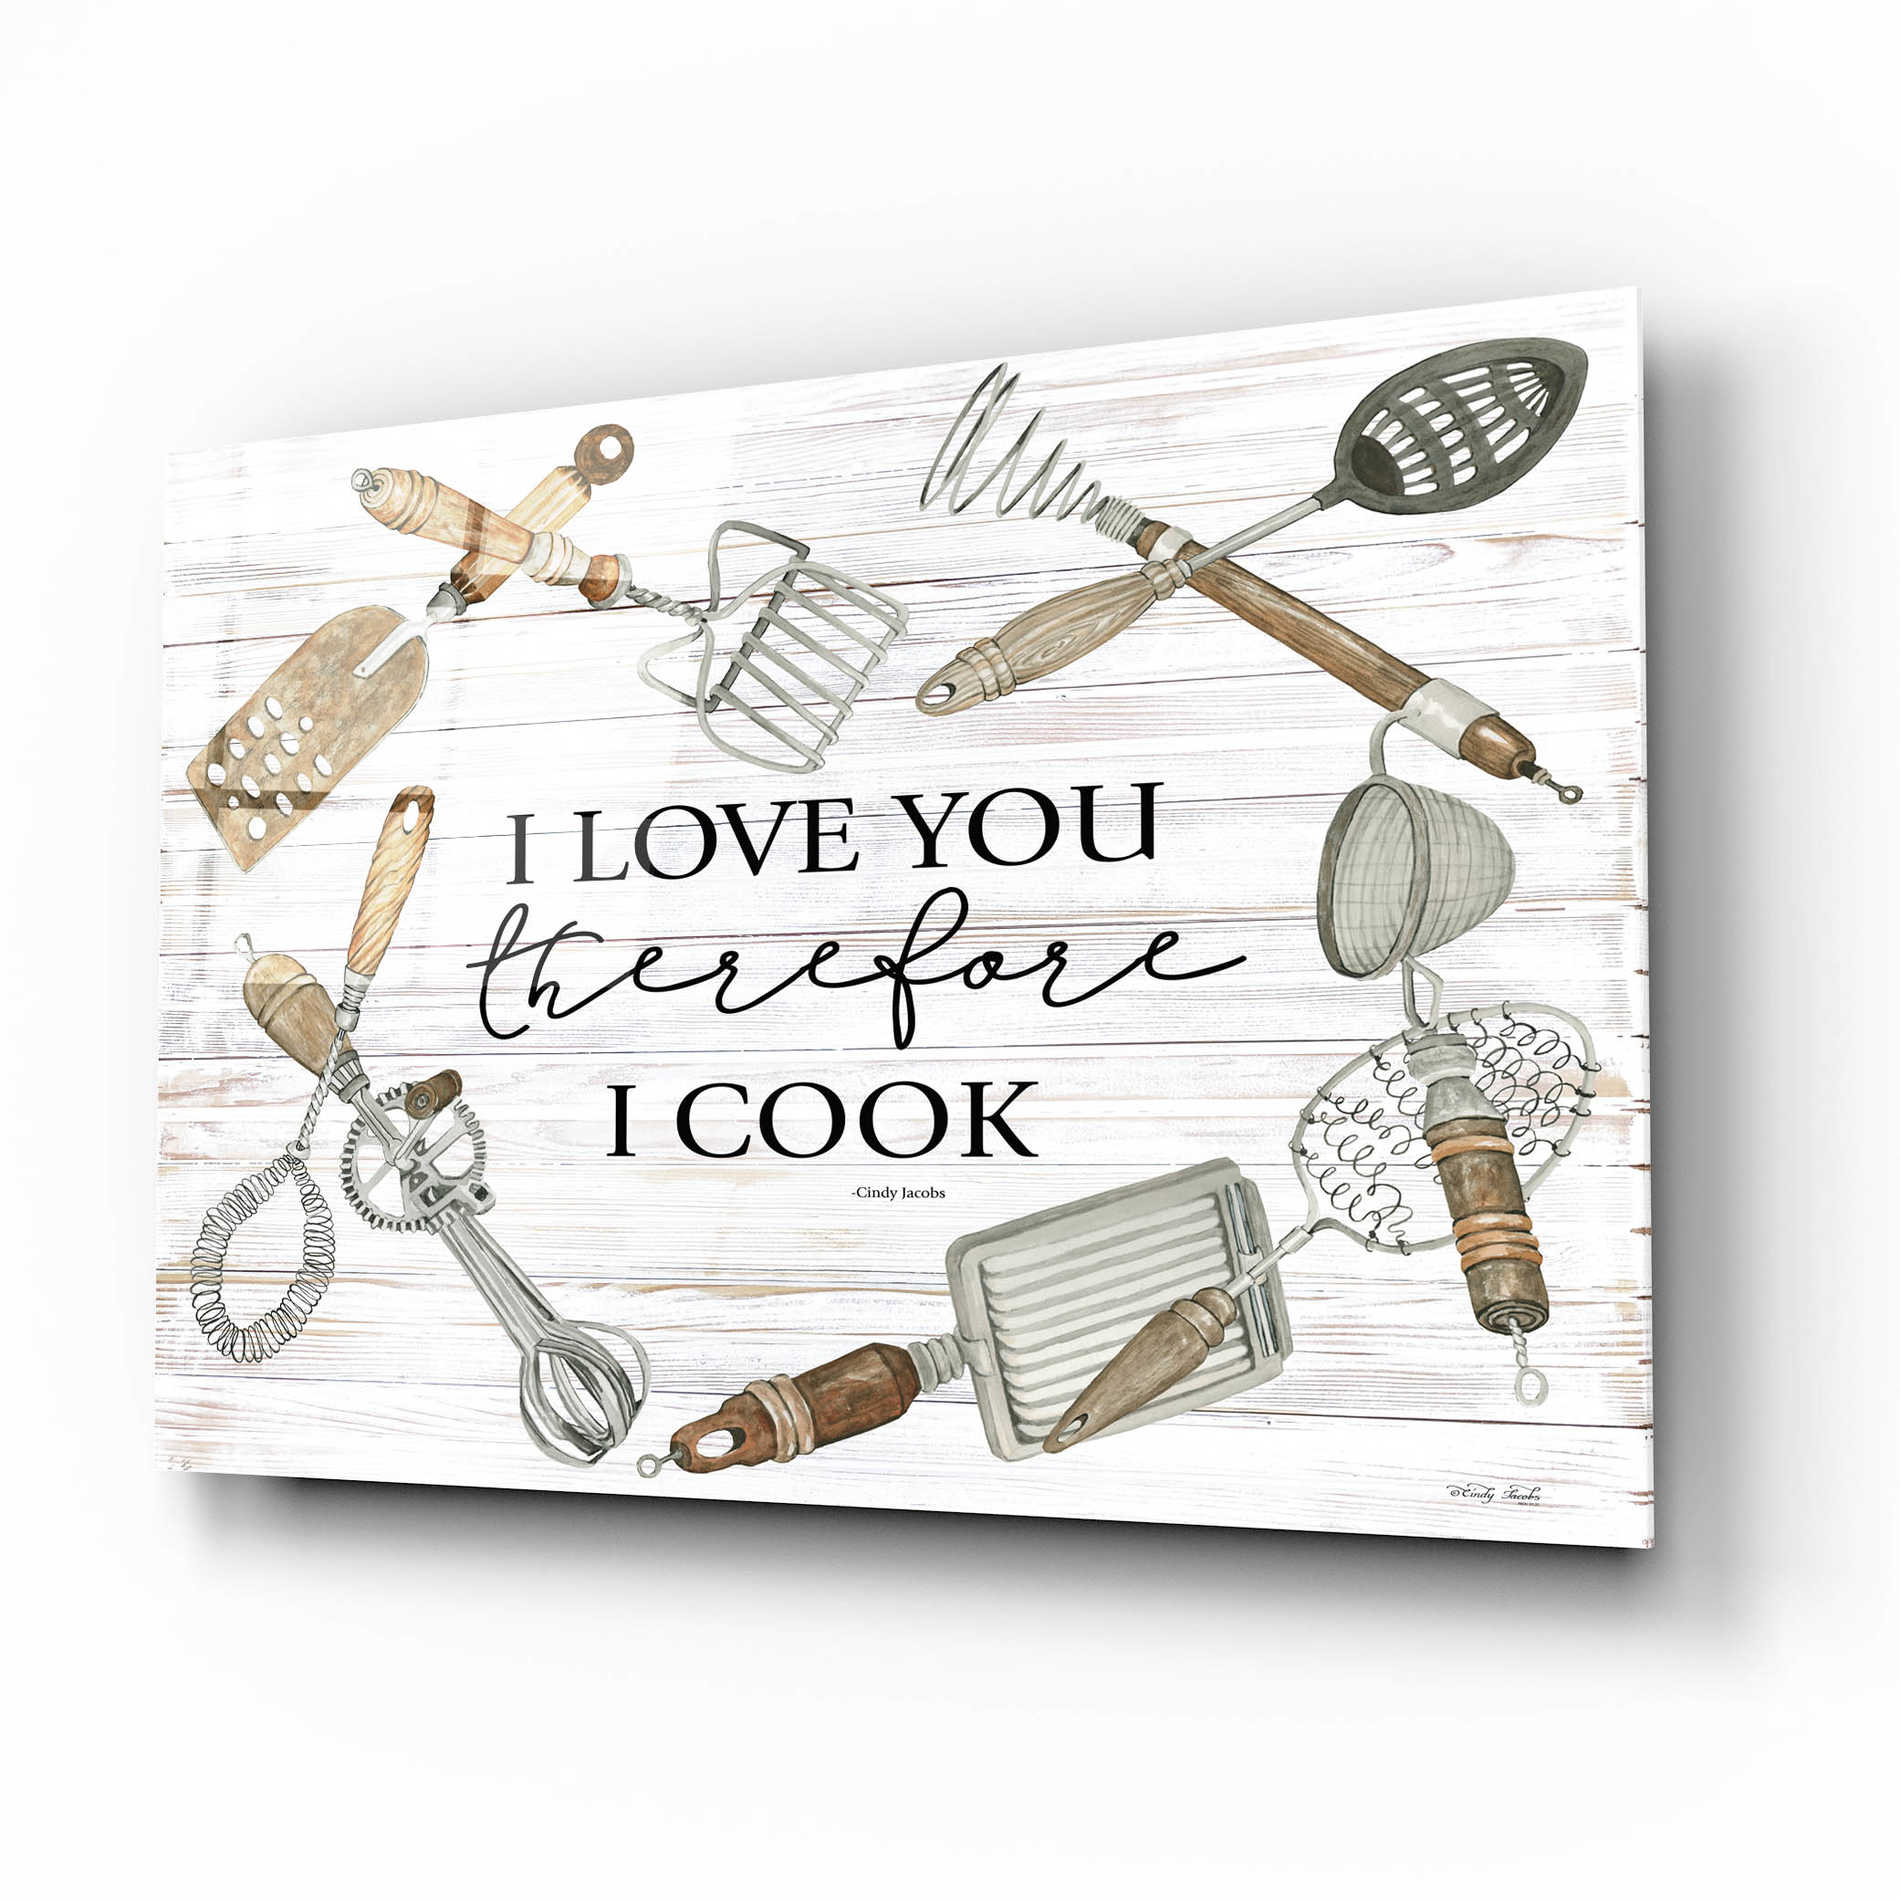 Epic Art 'I Love You Therefore I Cook' by Cindy Jacobs, Acrylic Glass Wall Art,16x12